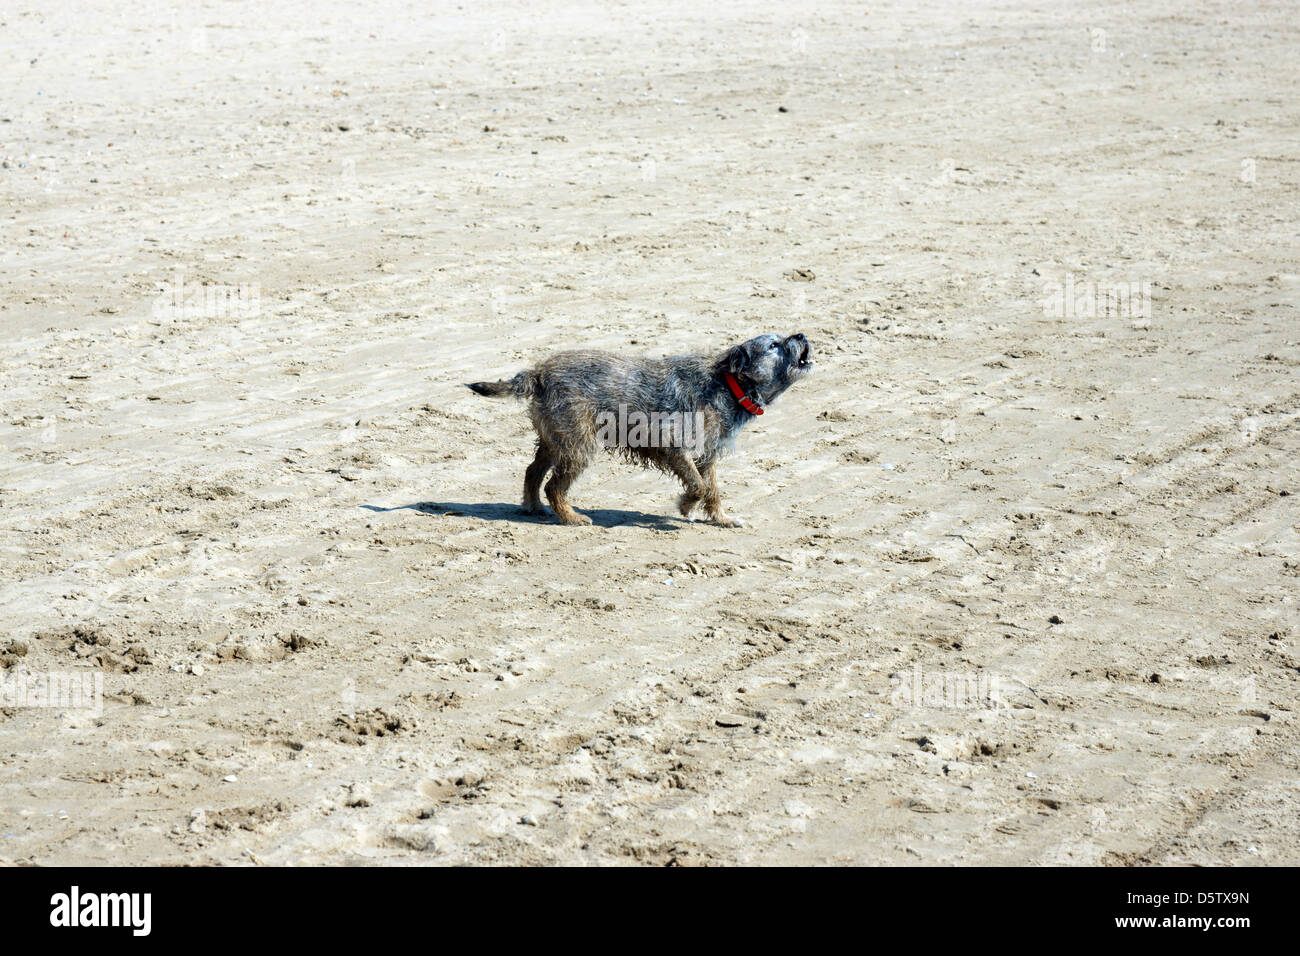 dog howling beach windy ears flapping happy Stock Photo